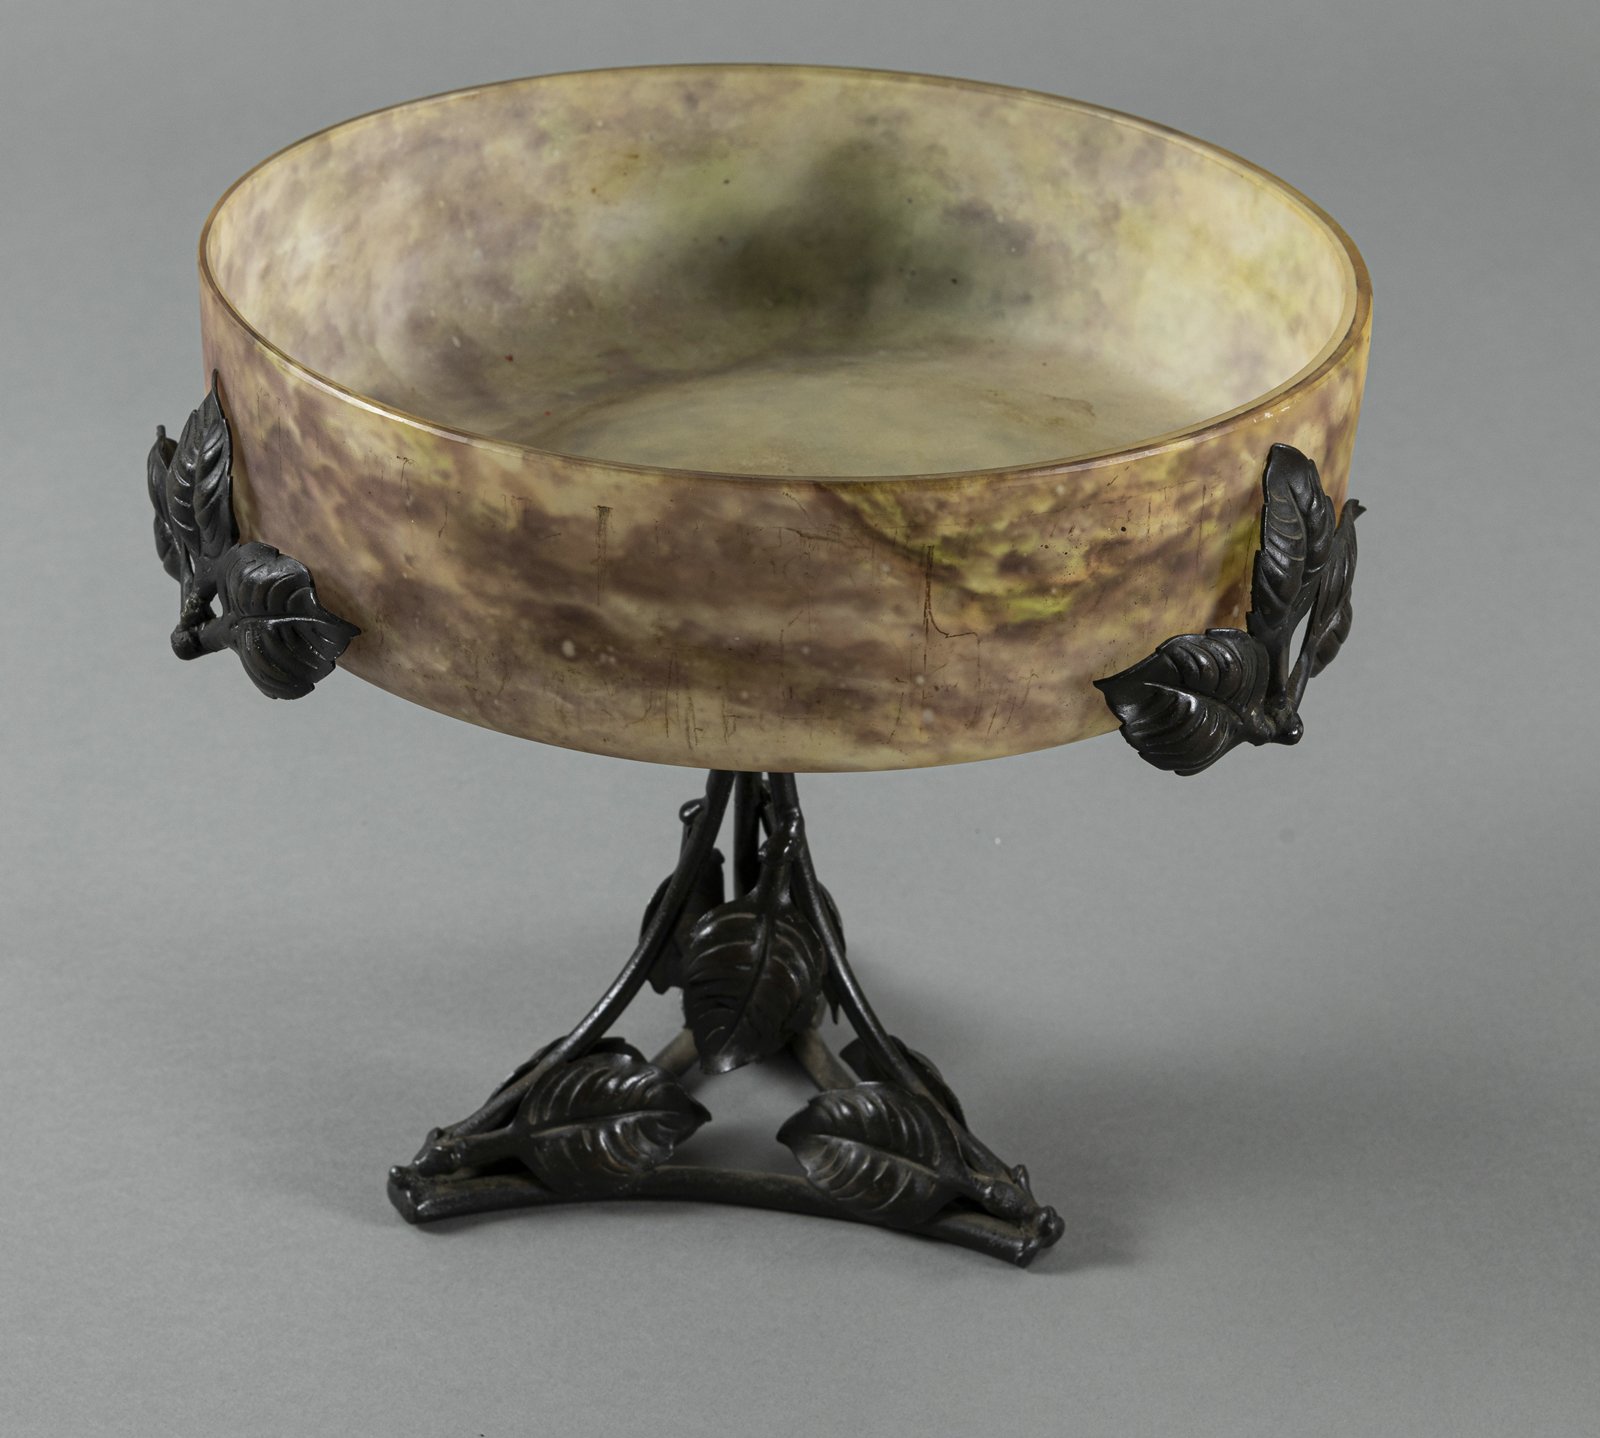 A FOOTED GLASS BOWL - Image 3 of 3